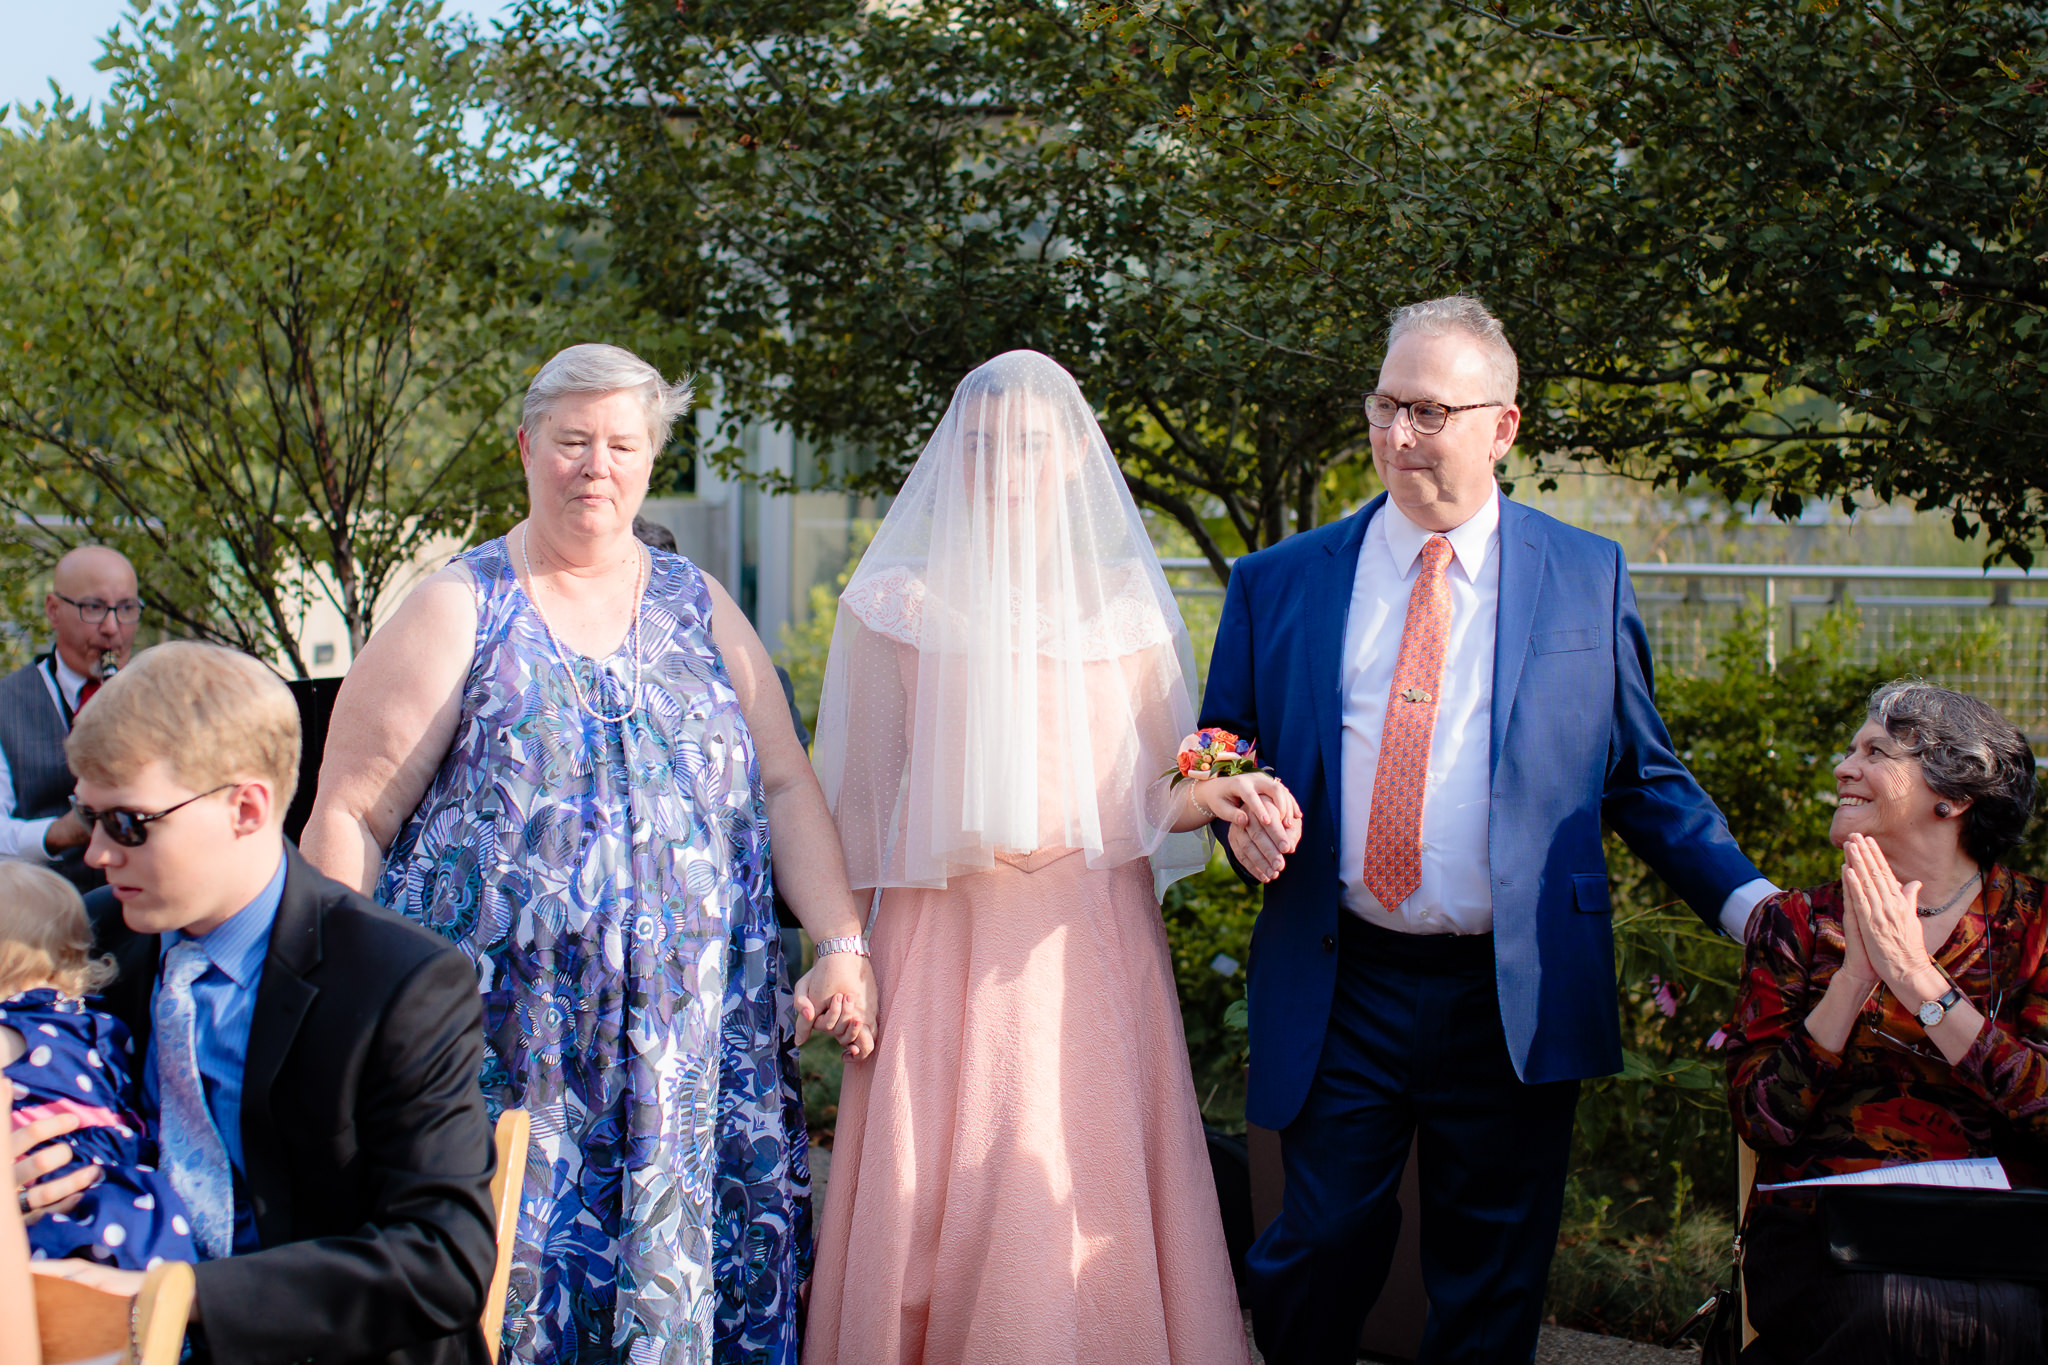 Parents of the bride walk her down the aisle at Phipps Conservatory